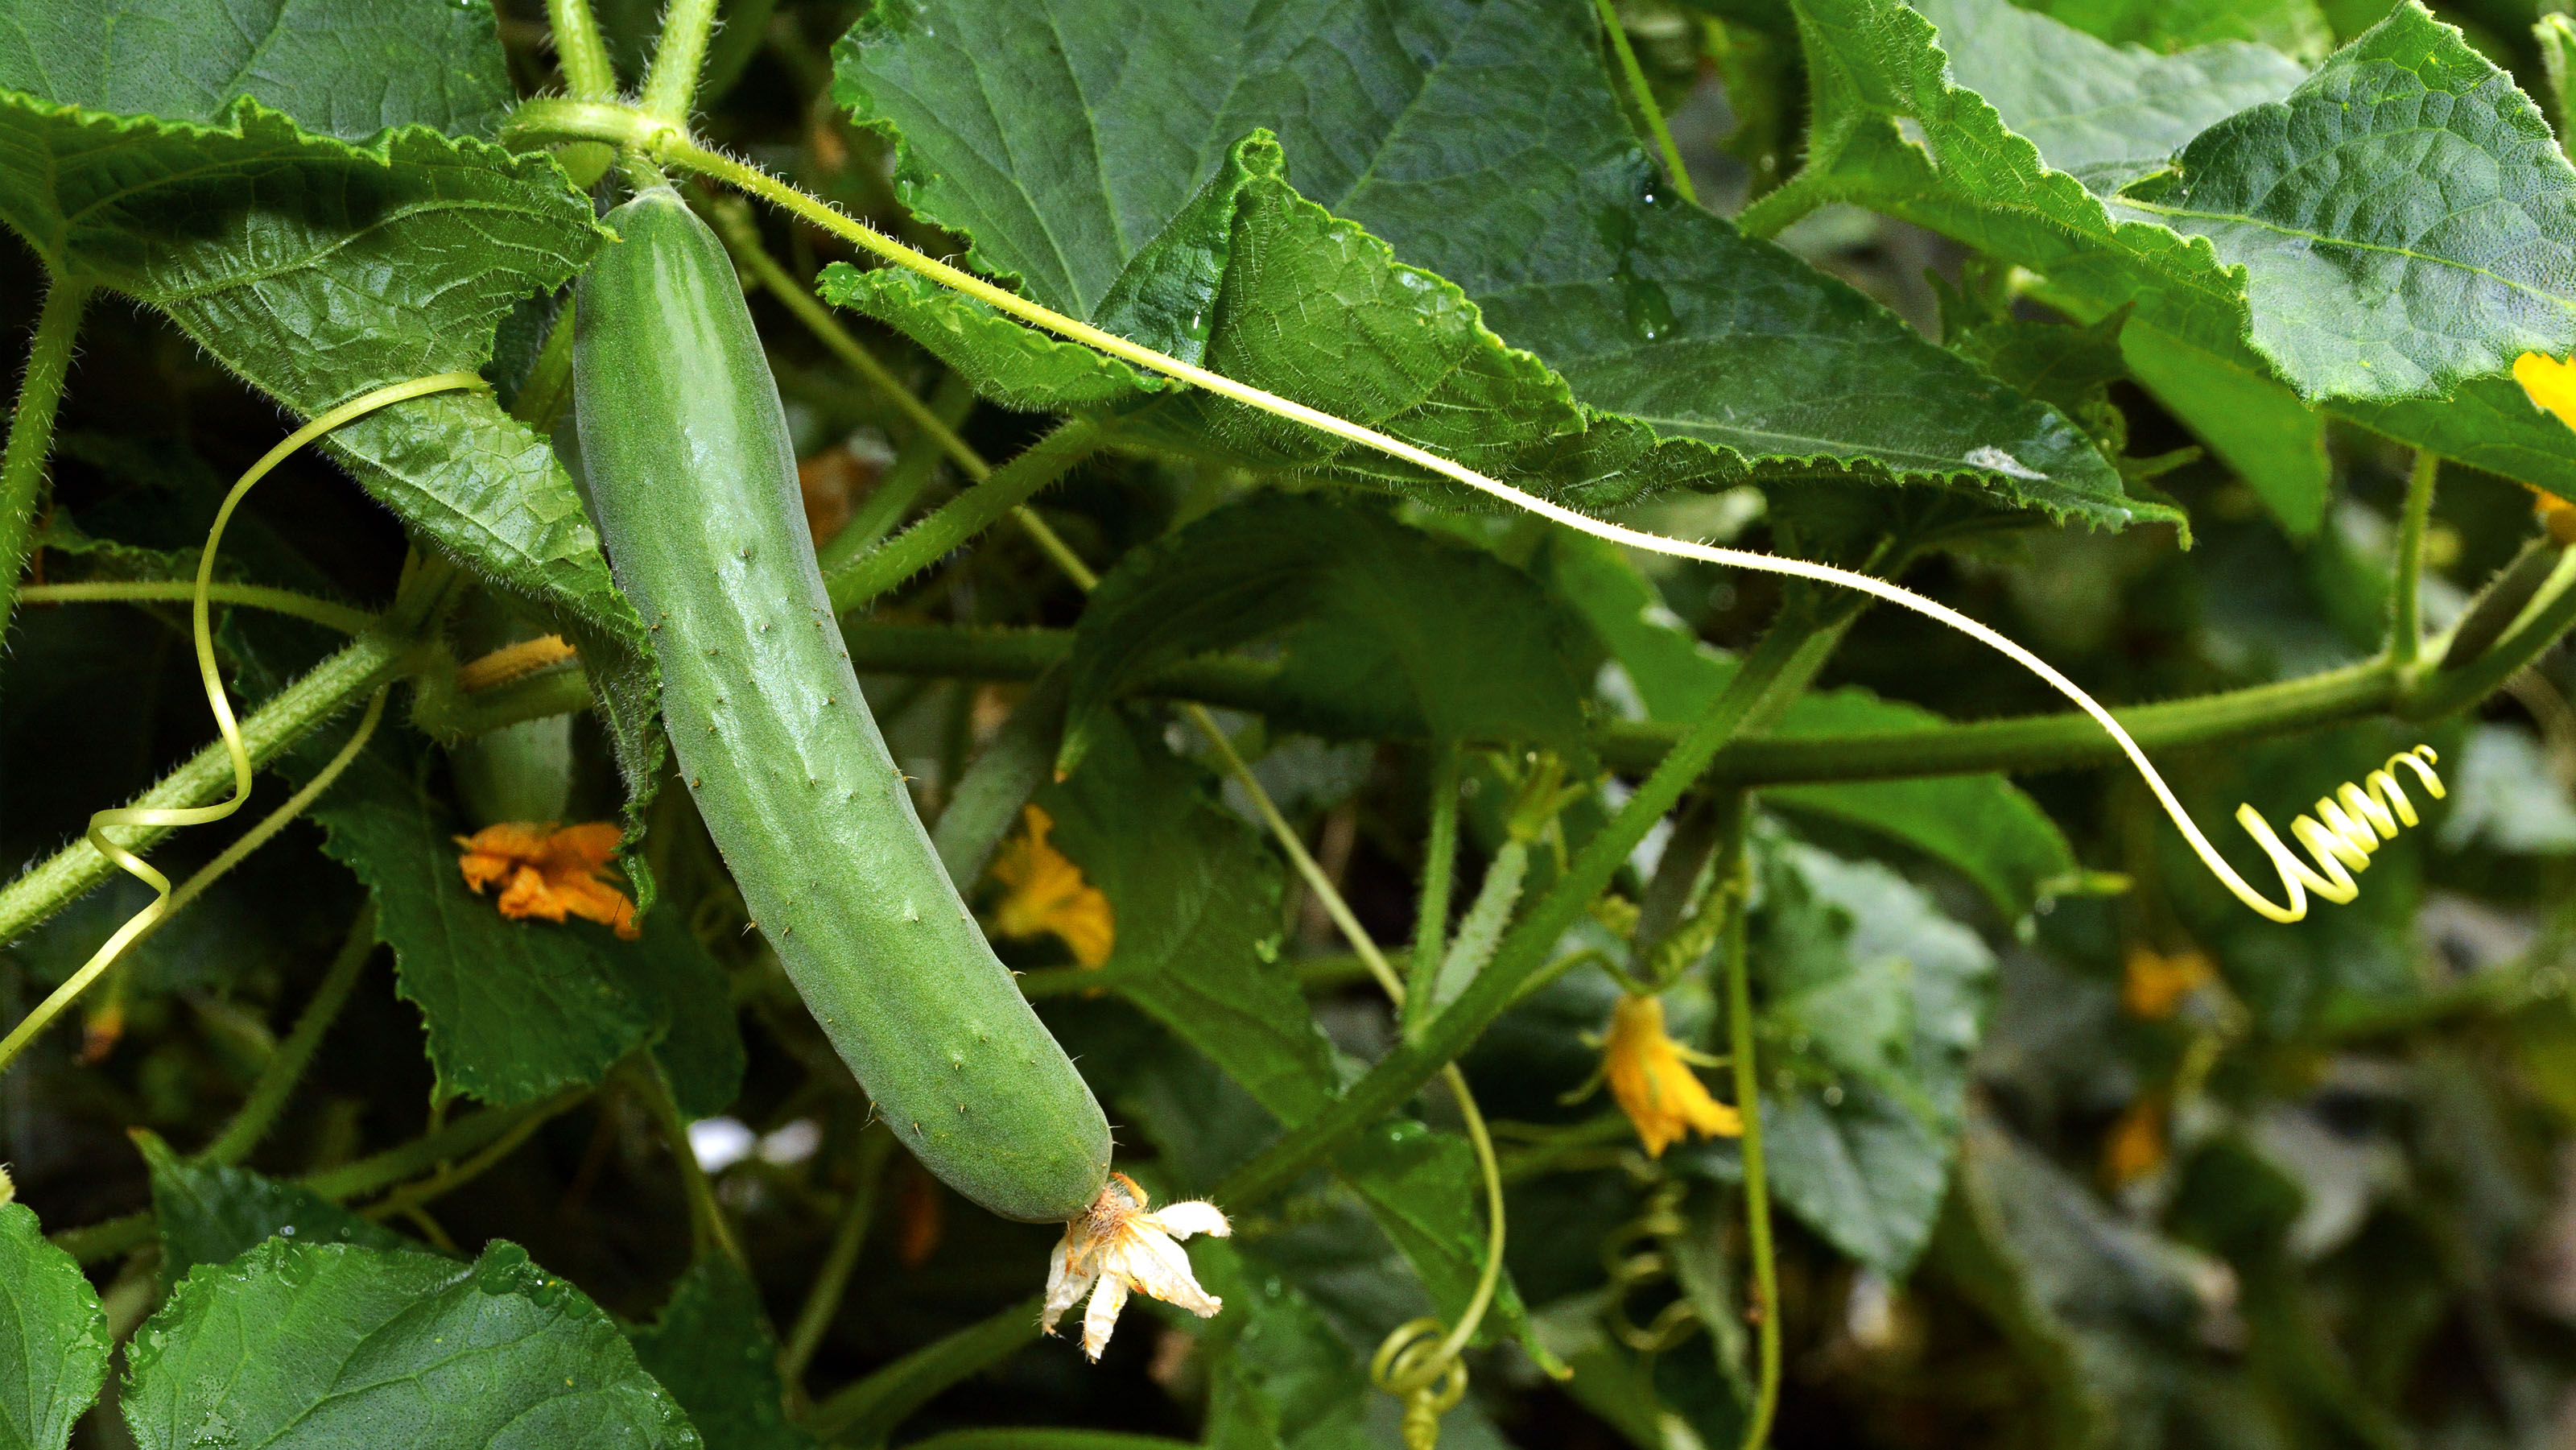 Growing English cucumbers not working out? This is why